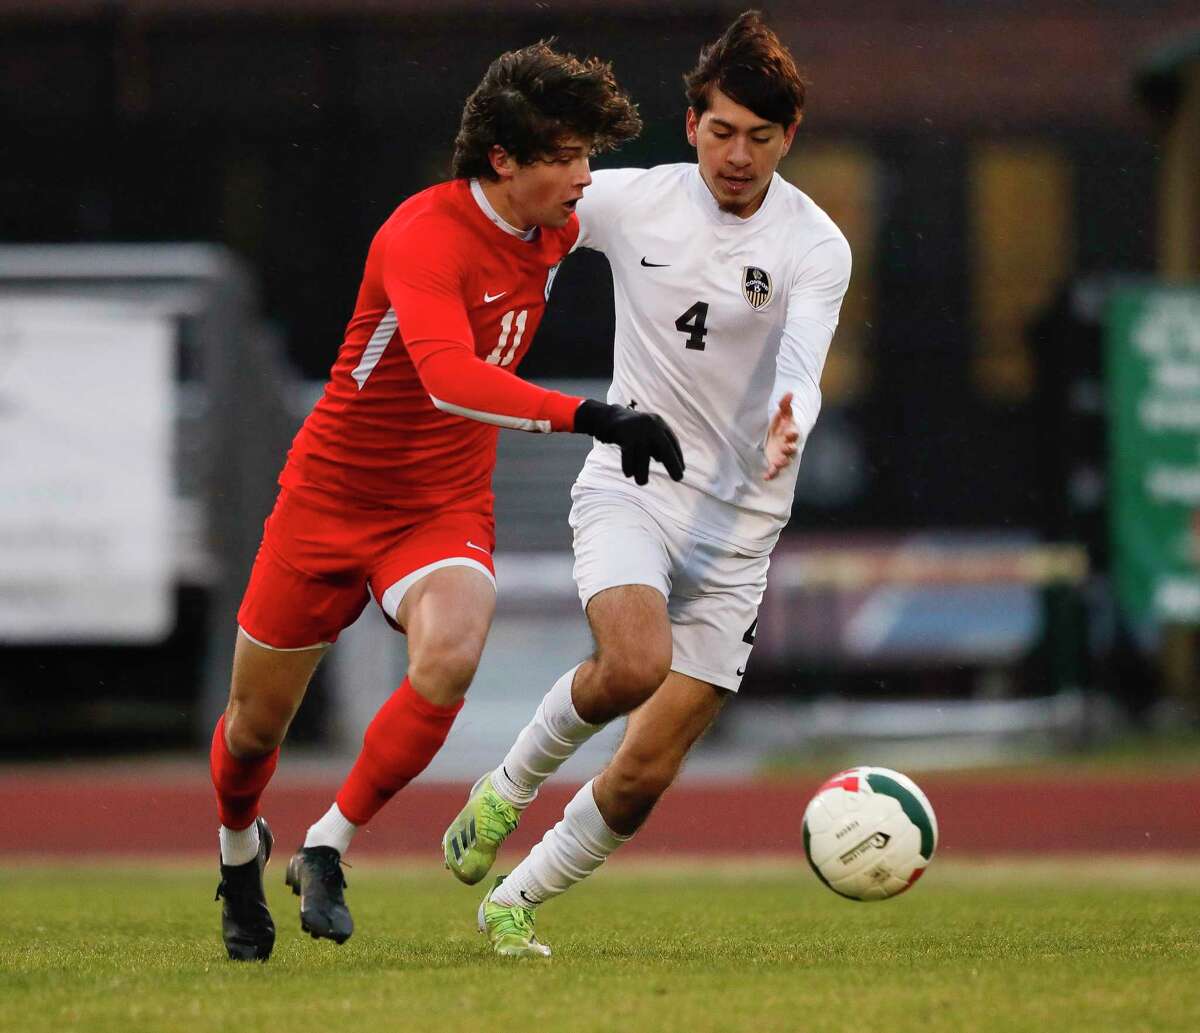 The Woodlands' Cody Tice (11) dribbles the ball against Conroe's Bernardo Fernandez (4) in the first period of a high school soccer match at The Woodlands High School, Friday, March 11, 2022, in The Woodlands.